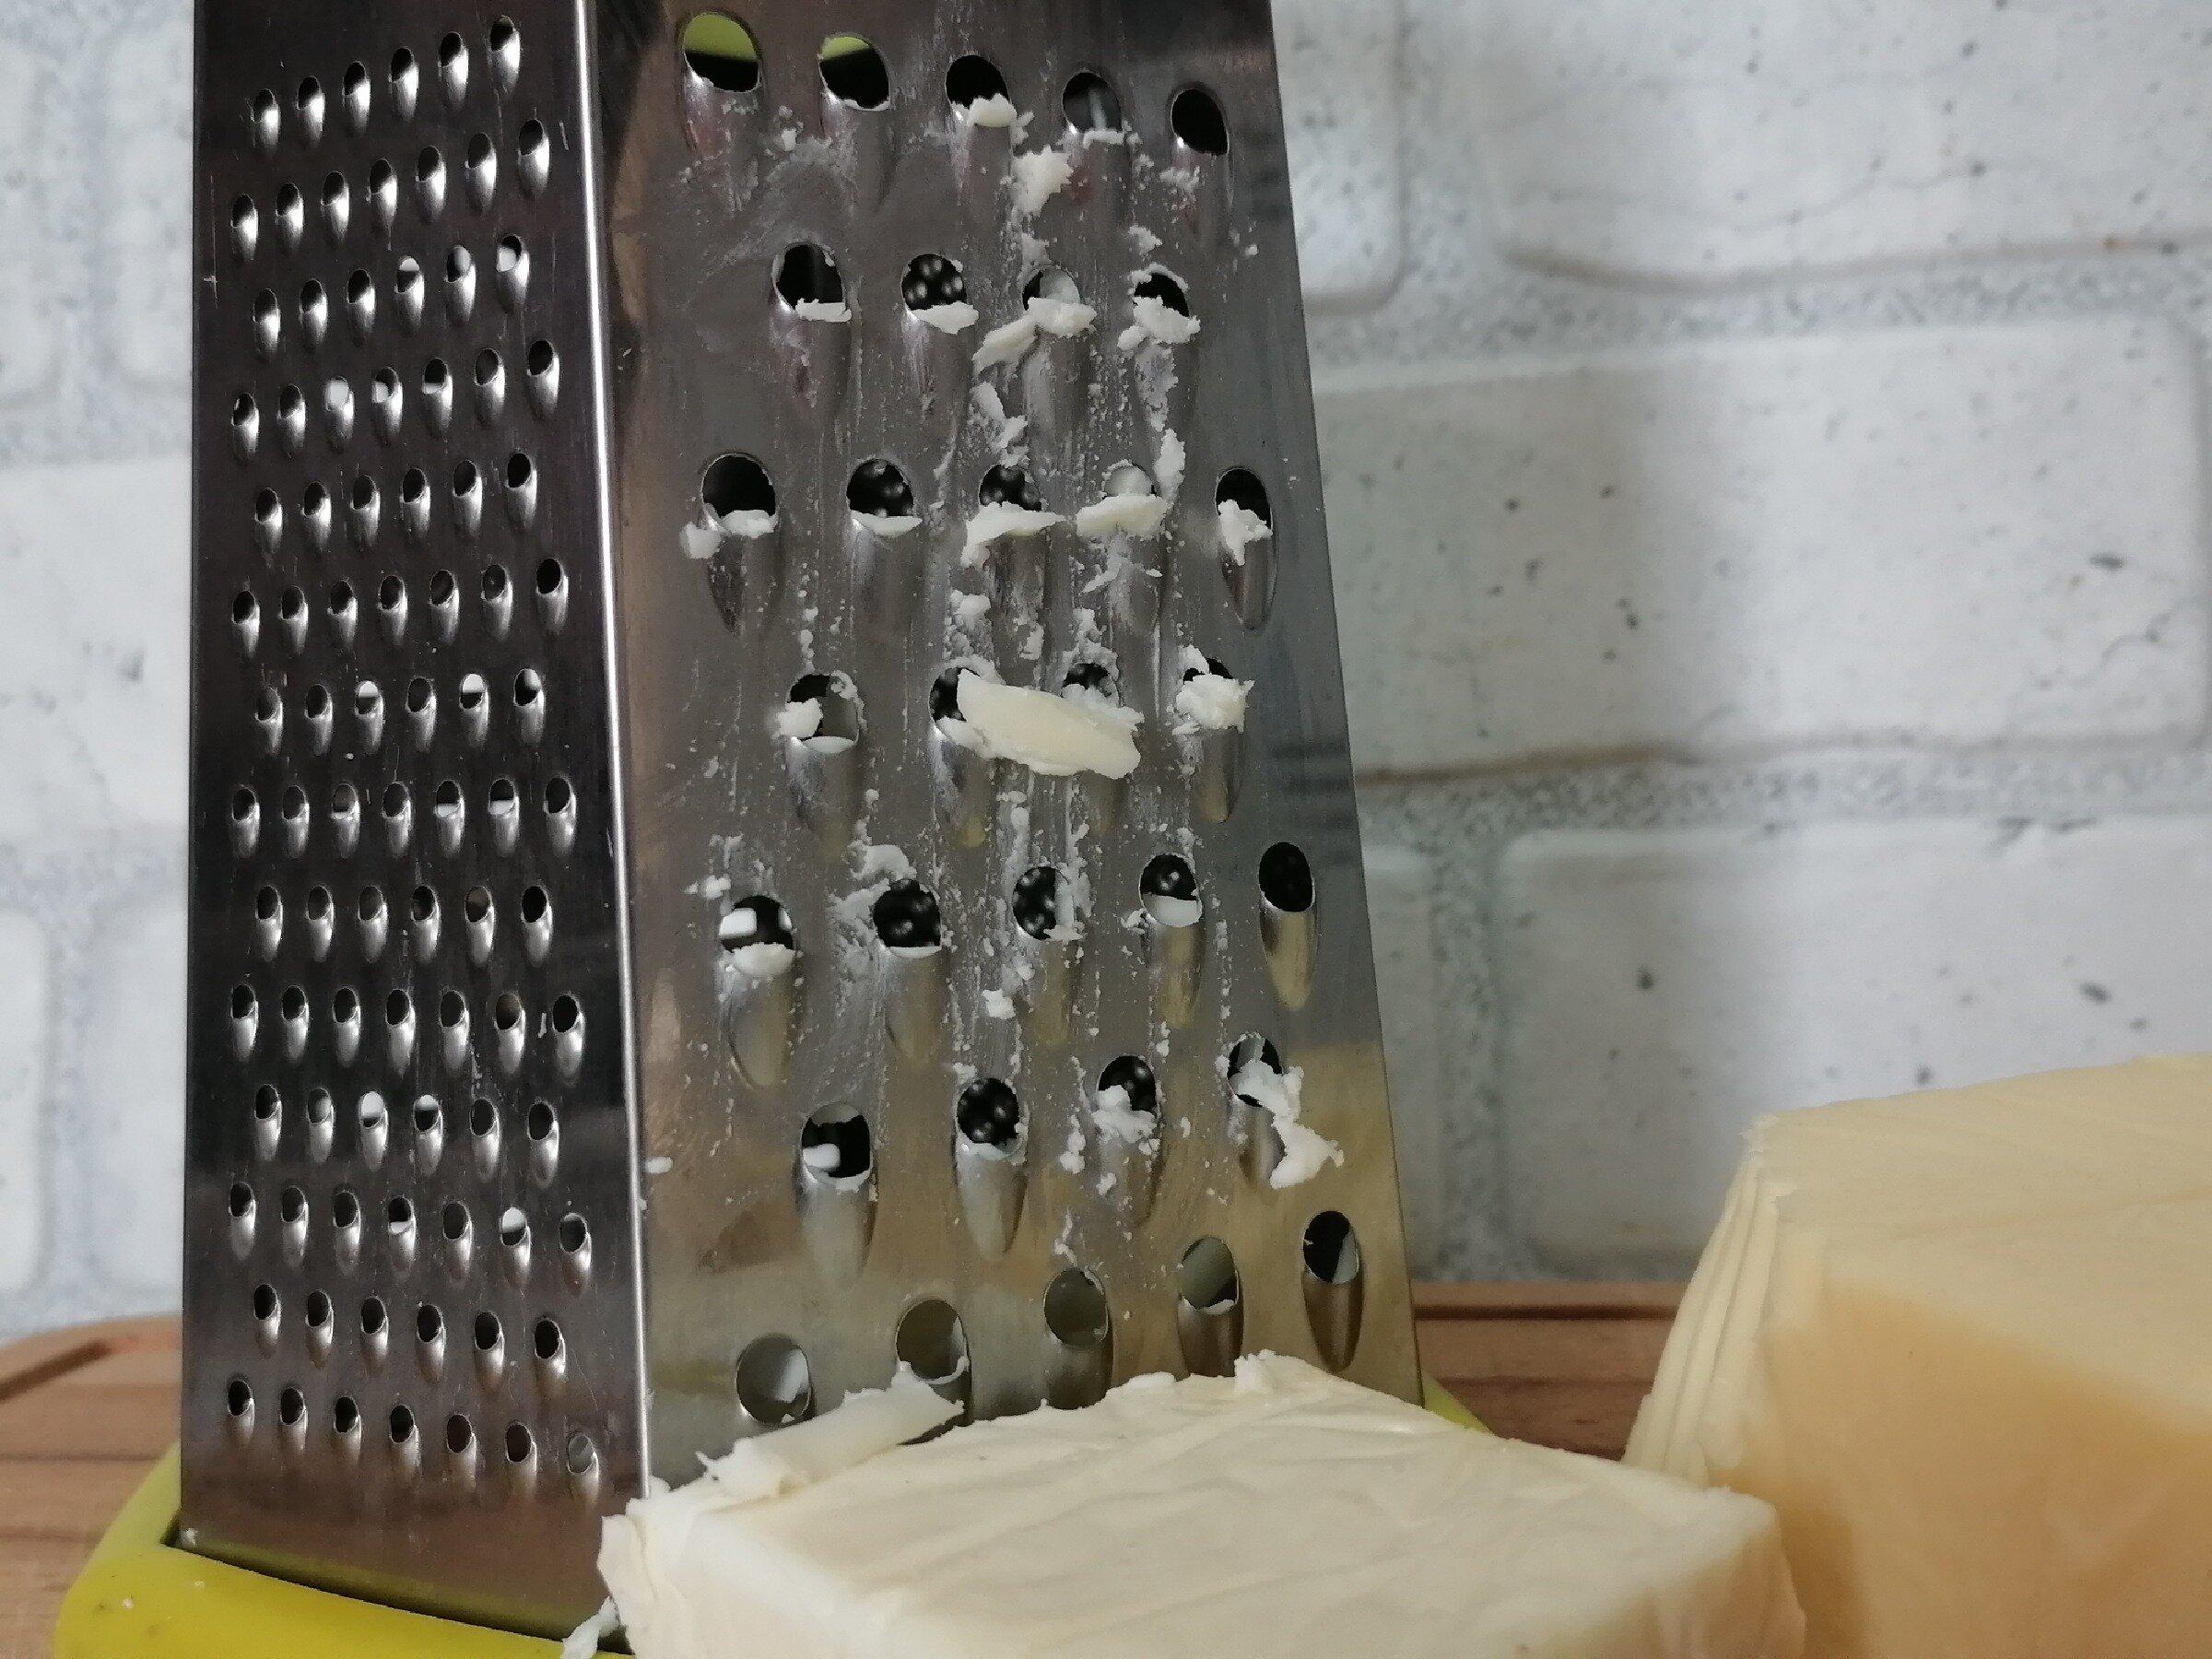 How to grate cheese on a grater to get perfectly smooth and whole strips